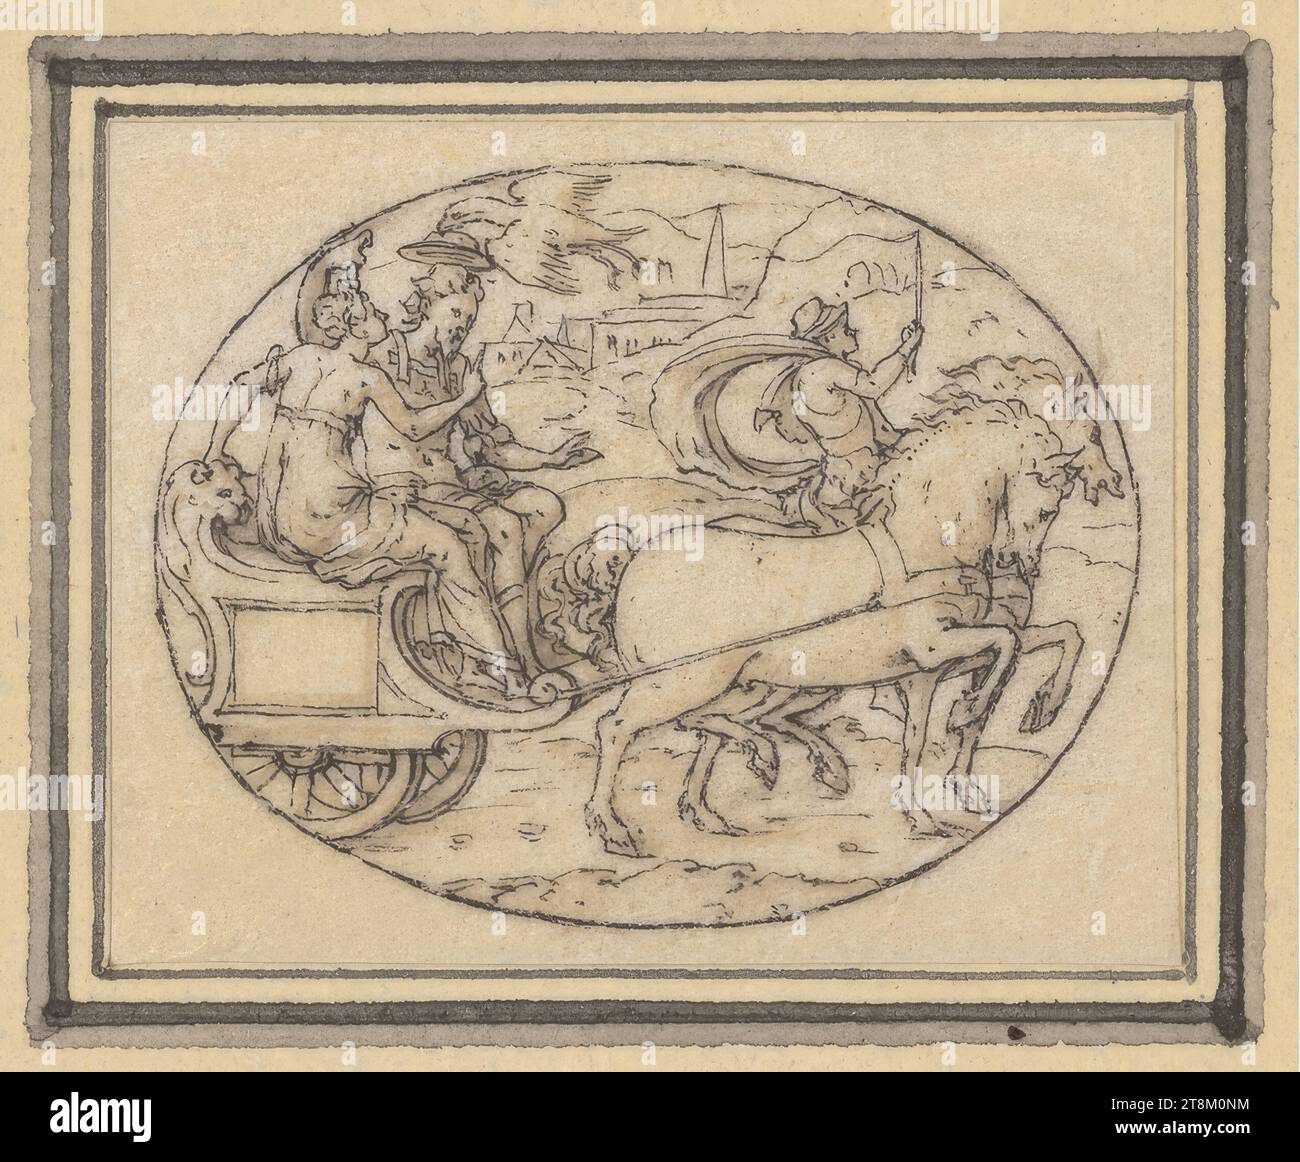 Pelops and Hippodamaia, Scenes from Ancient Mythology and Roman History, Étienne Delaune (Paris 1518/19 - 1583 Paris), drawing, pen, ink, brush, washed with brown ink, on parchment, 3.4 x 4.4 cm, l.b. Duke Albert of Saxe-Teschen Stock Photo